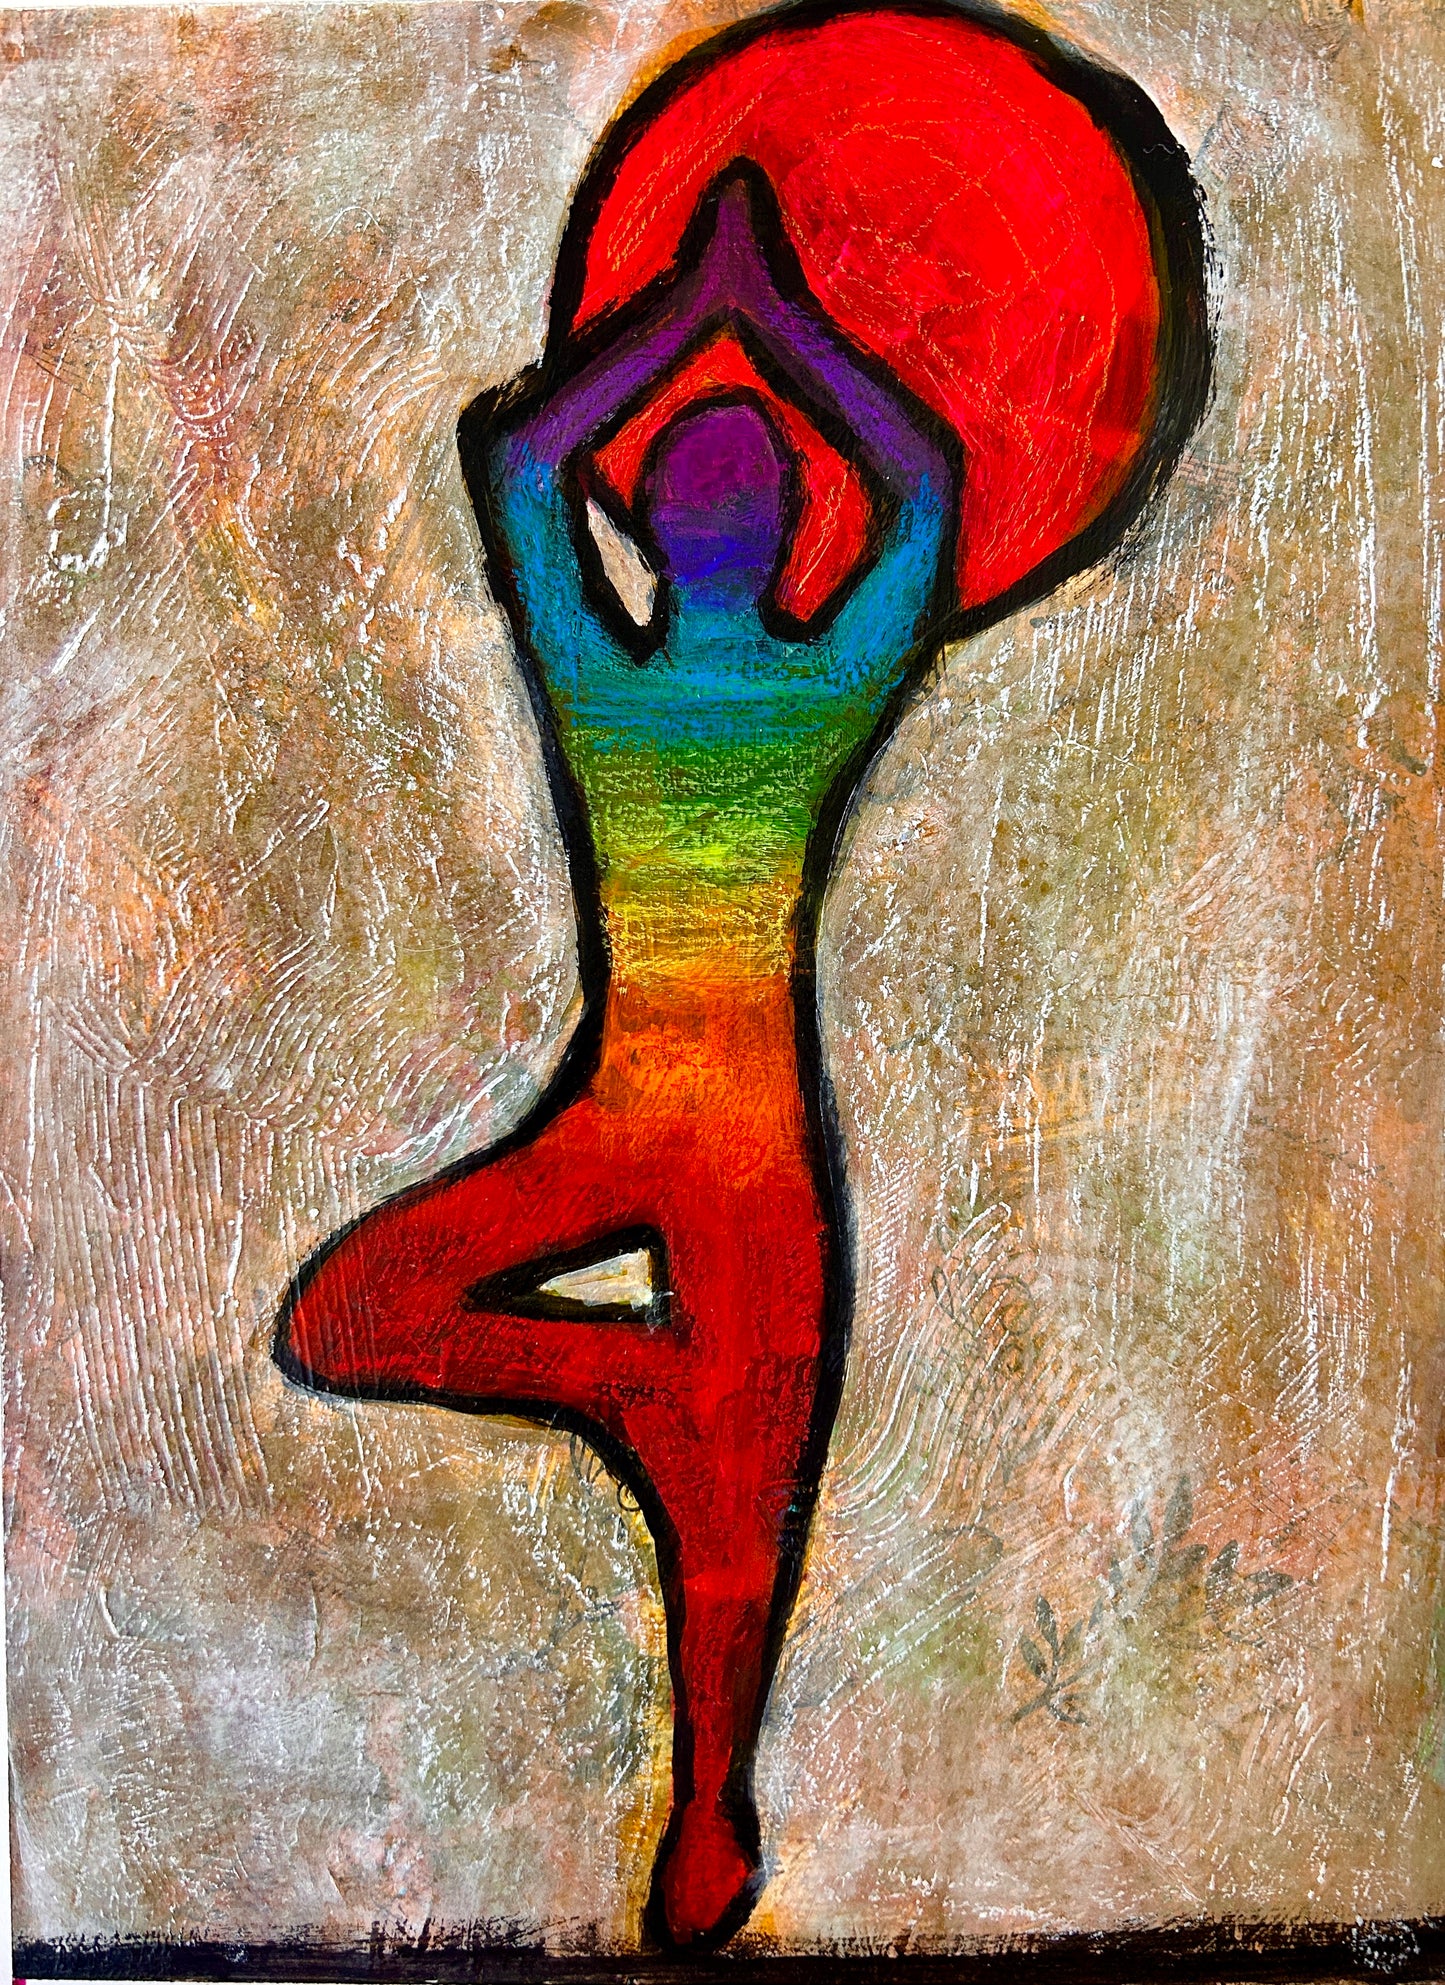 Yoga by Sunlight - by Moonlight: Colorful Mix Media and Acrylic Artwork by Artist Elisa Amari"